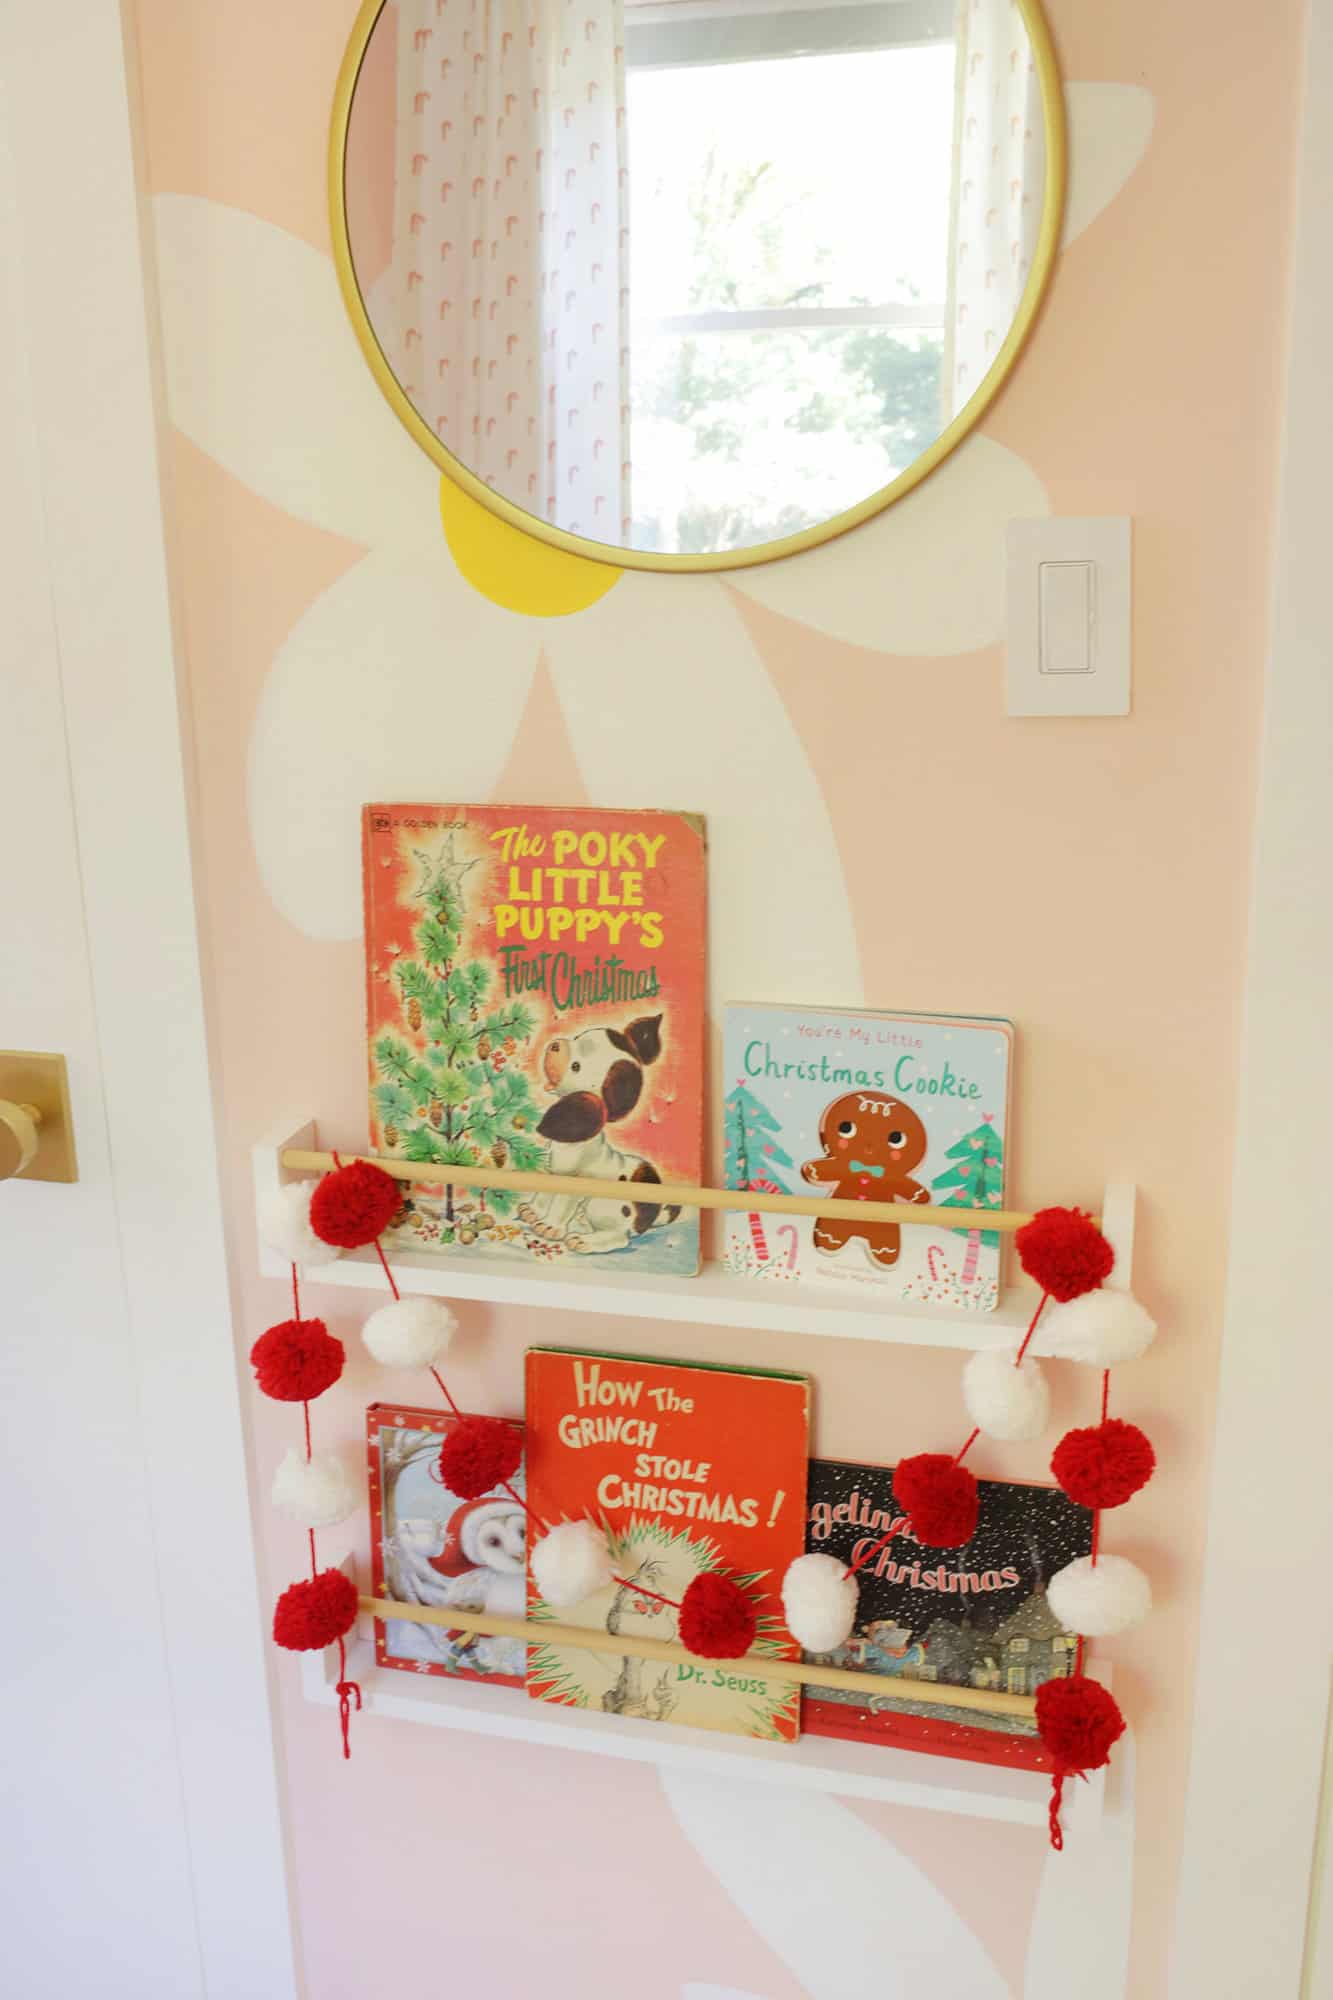 Children's room with a Christmas bookshelf with a Christmas theme